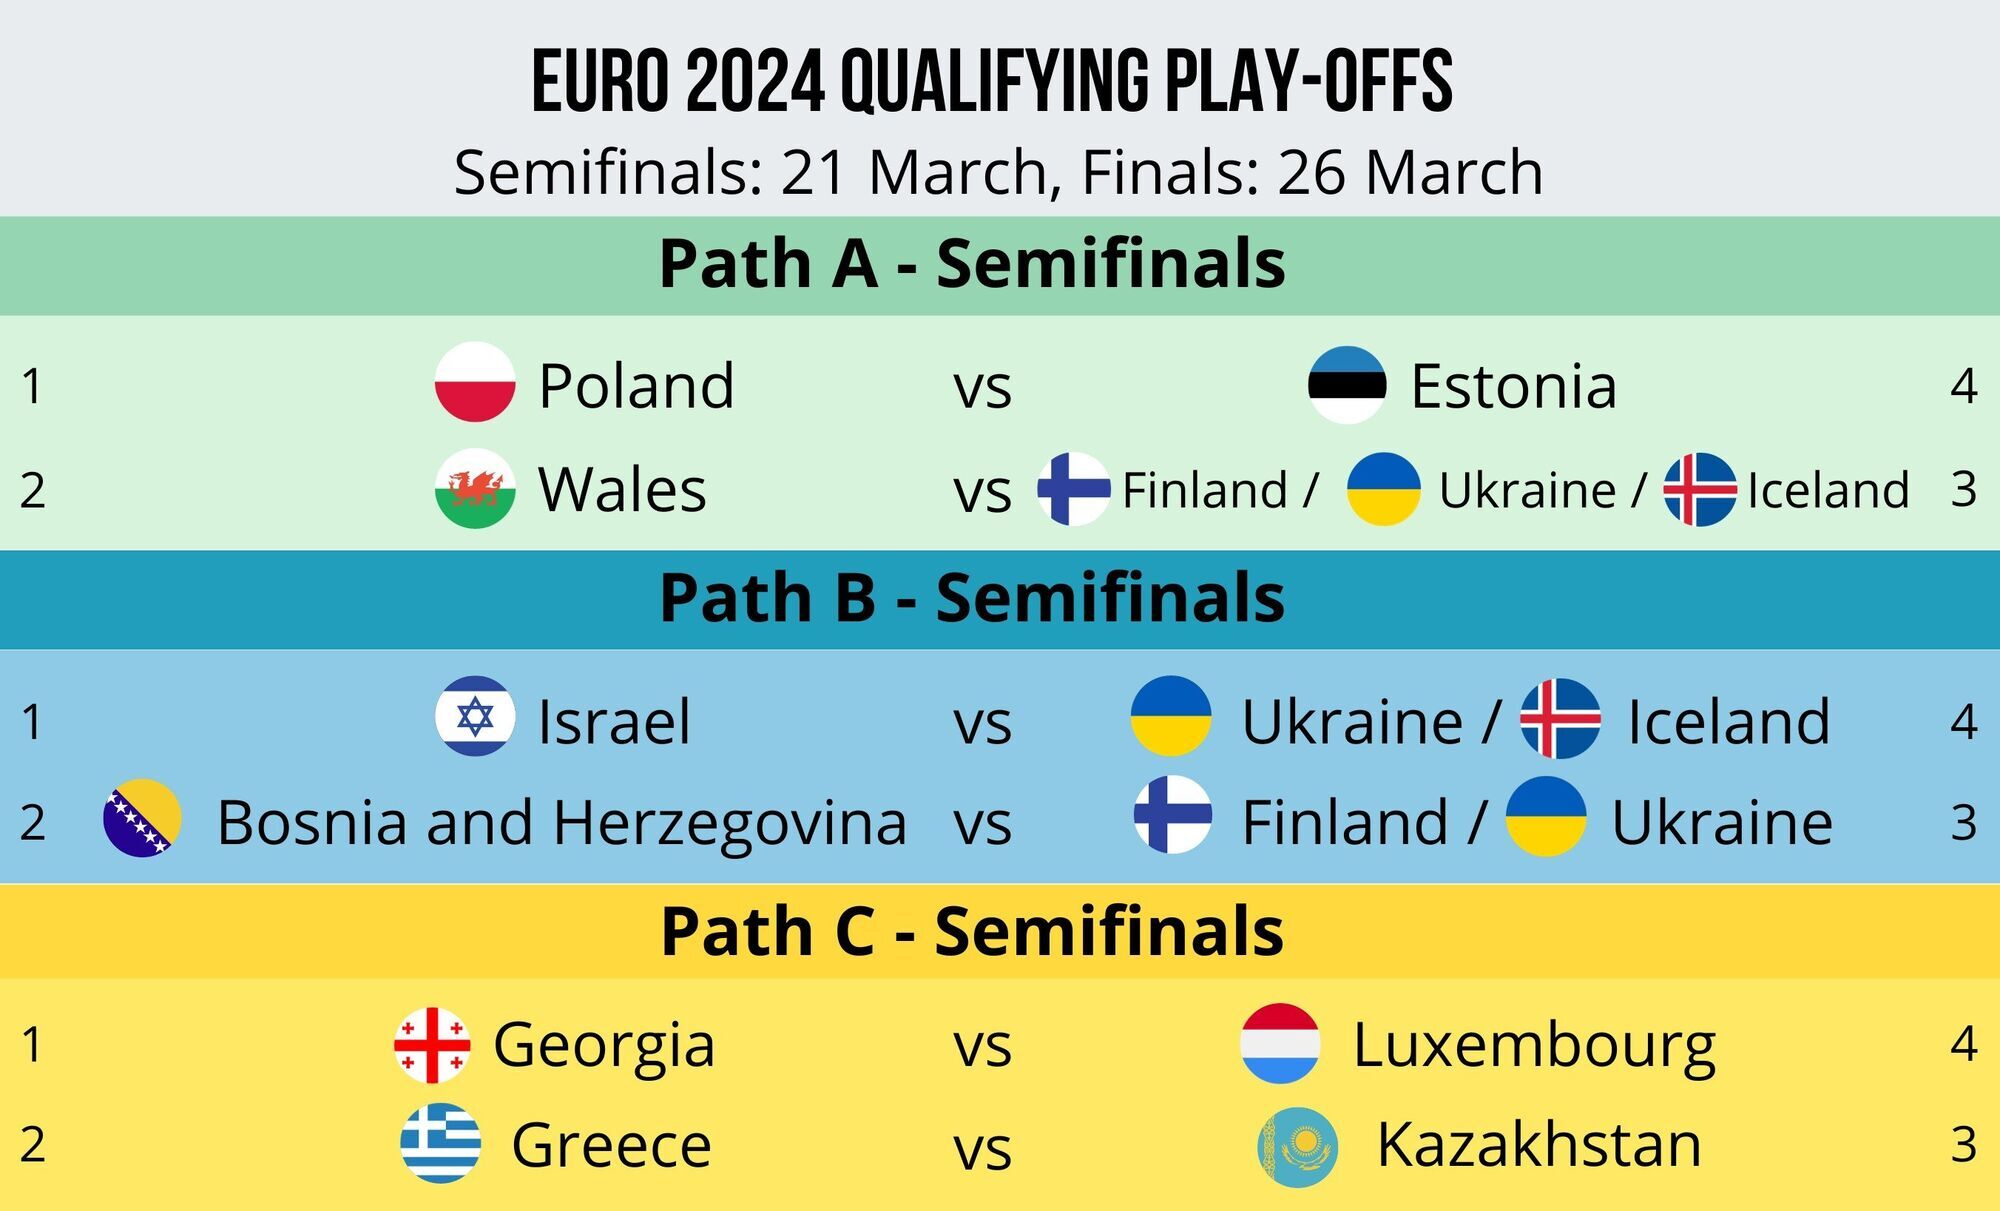 Ukraine will take part in the Euro 2024 draw: UEFA announces the baskets